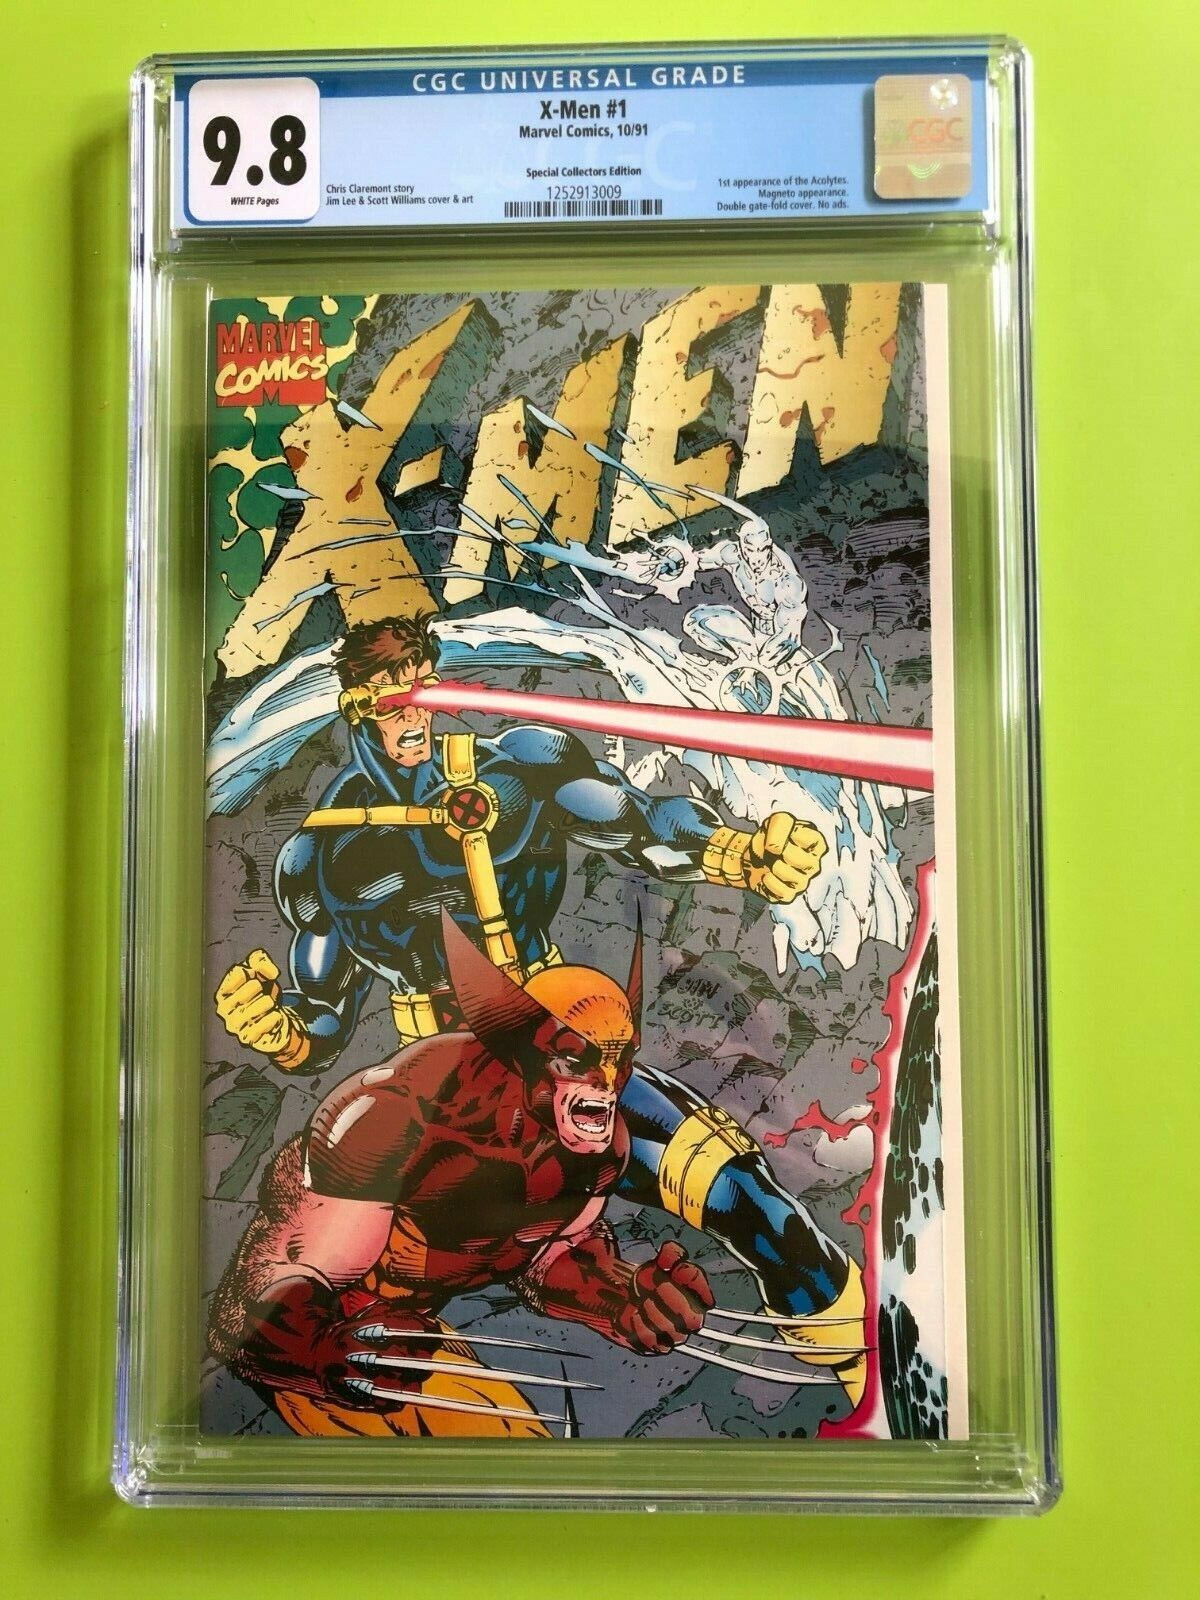 X-MEN 1 - CGC 9.8 WHITE PAGES. A MUTANT MILESTONE. SPECIAL COLLECTORS EDITION.